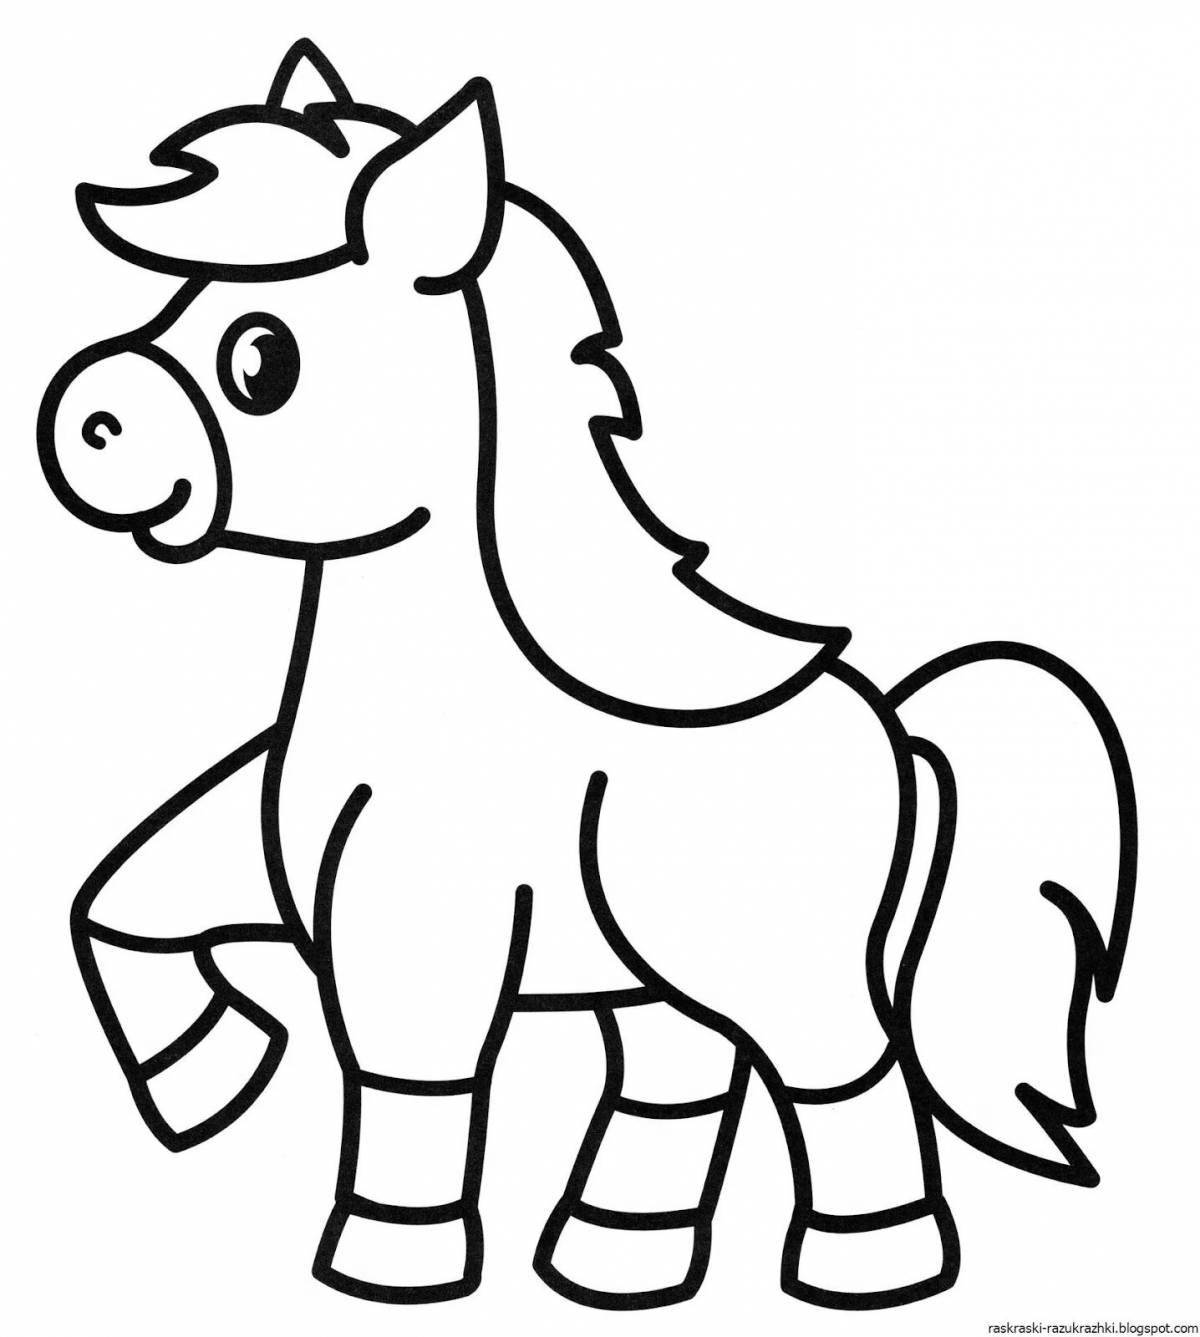 Coloring page joyful horse for children 2-3 years old